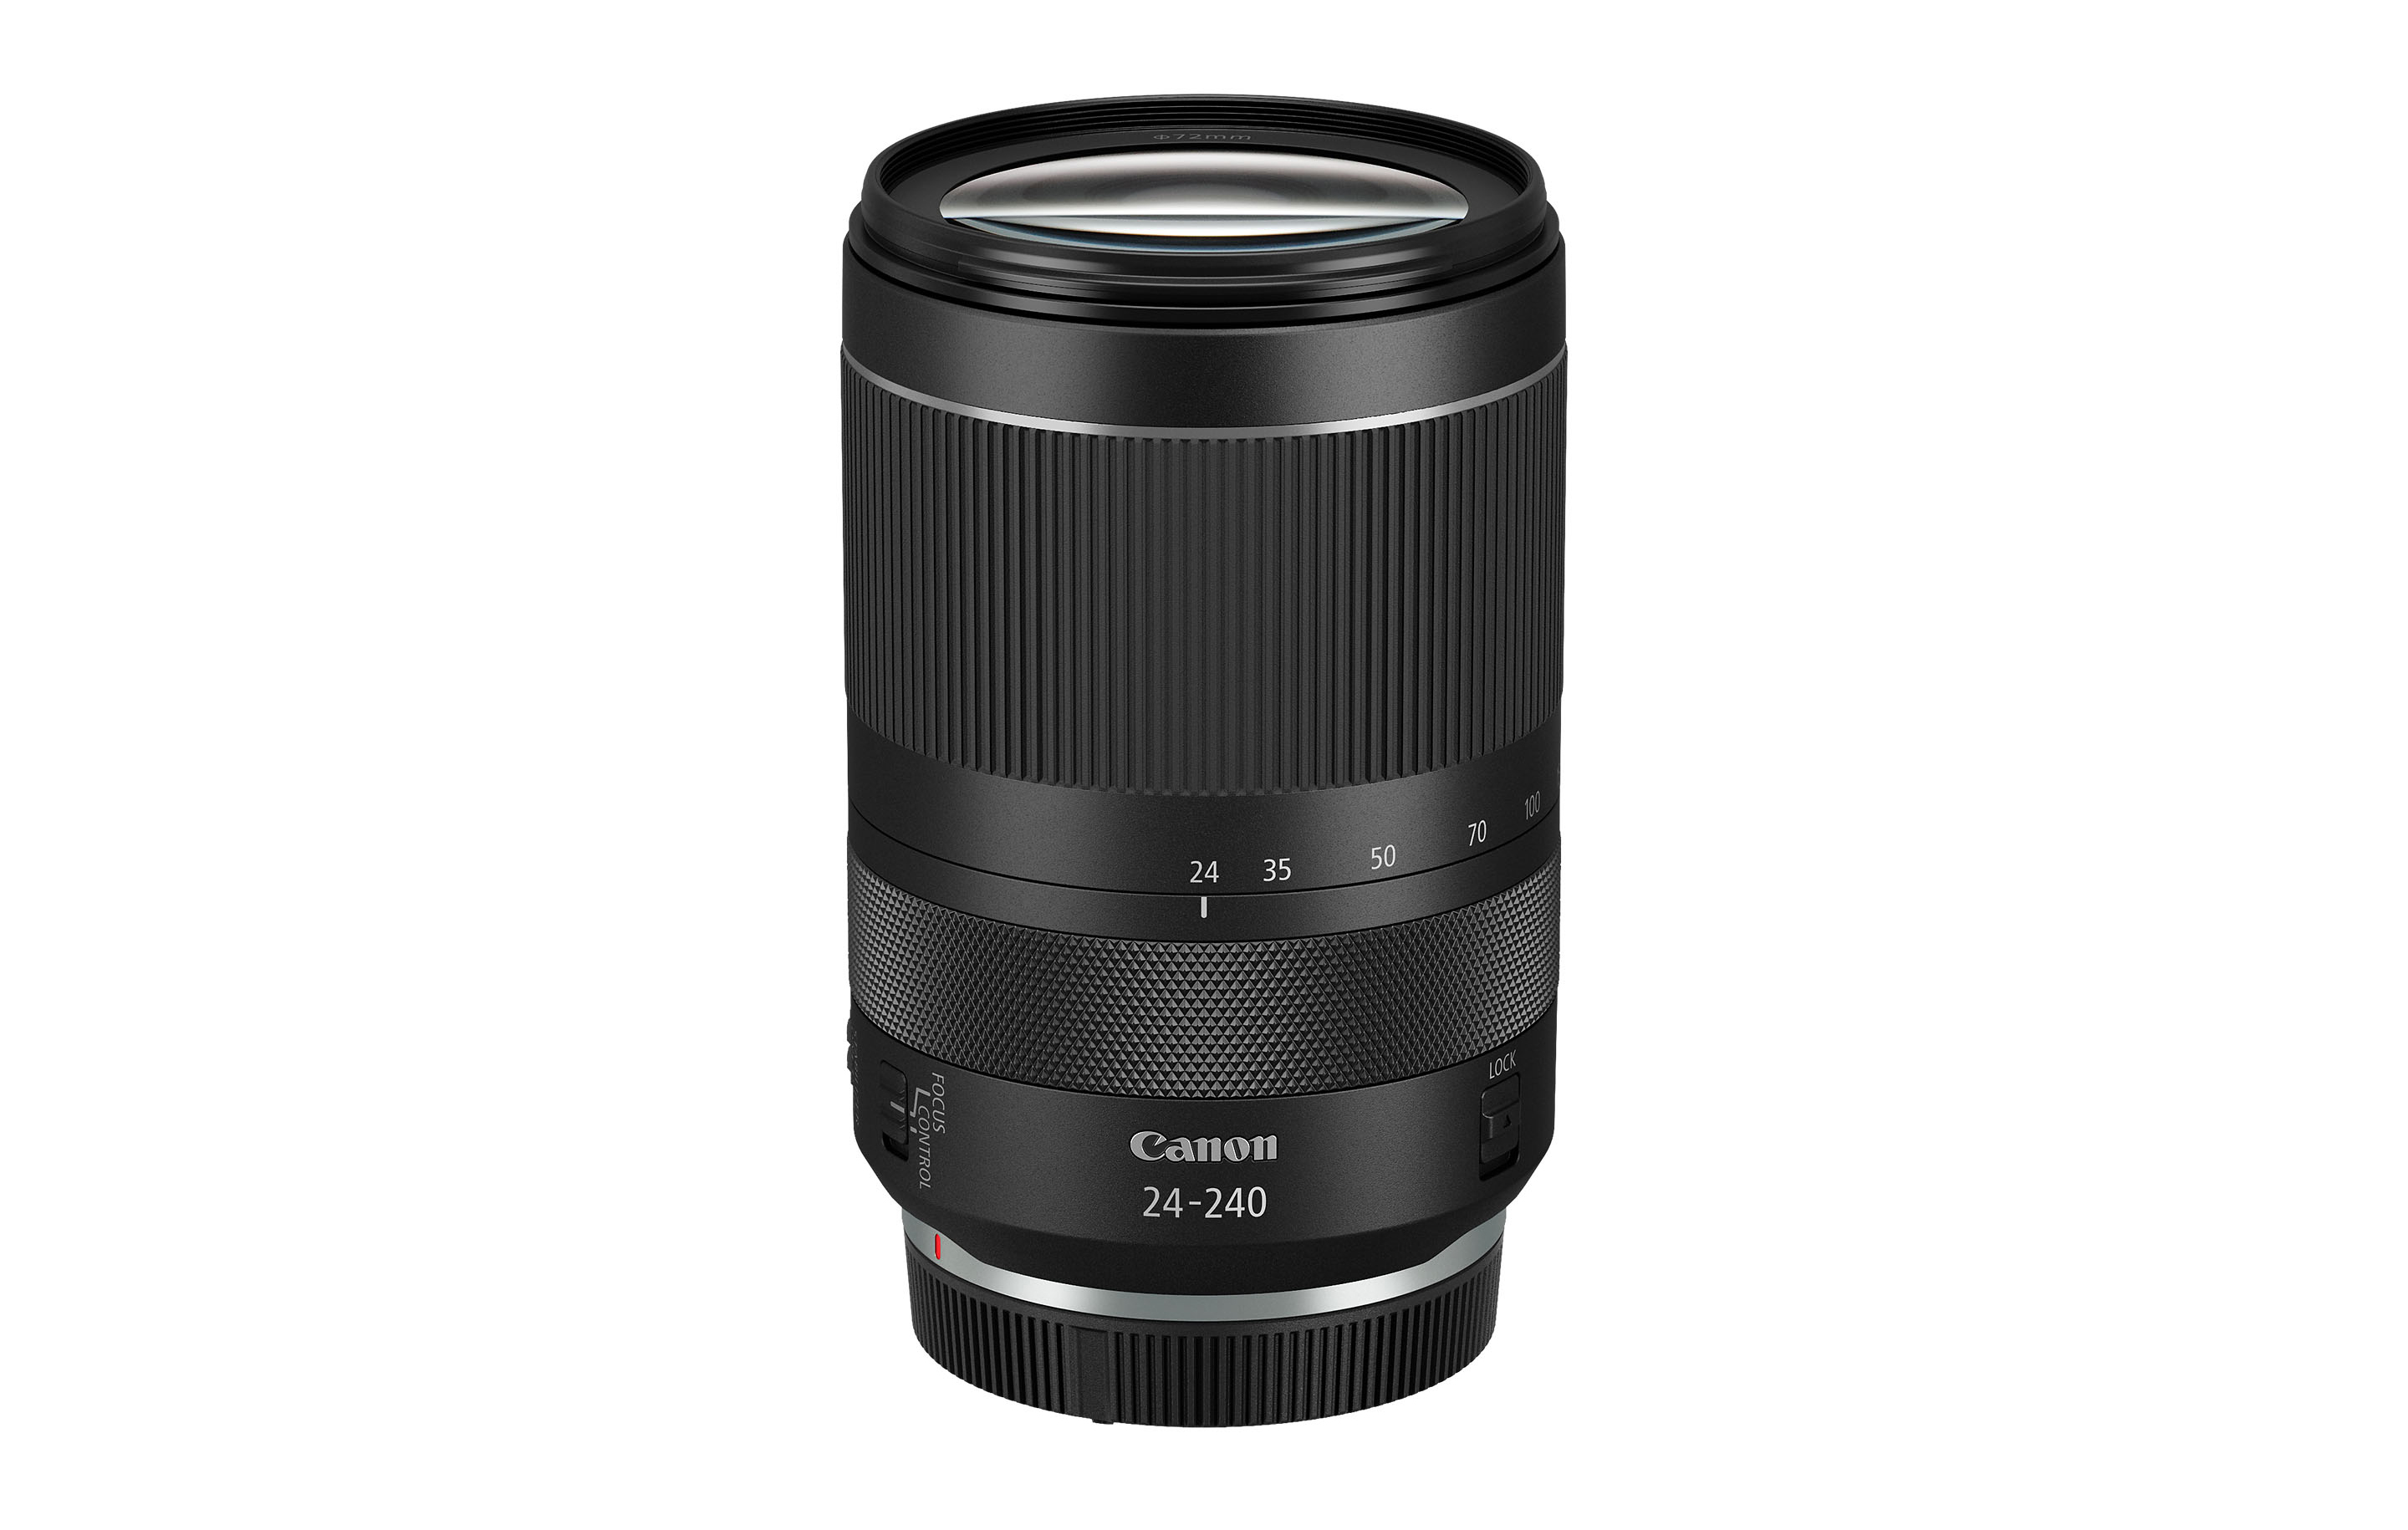 Focus/Control ring on lens